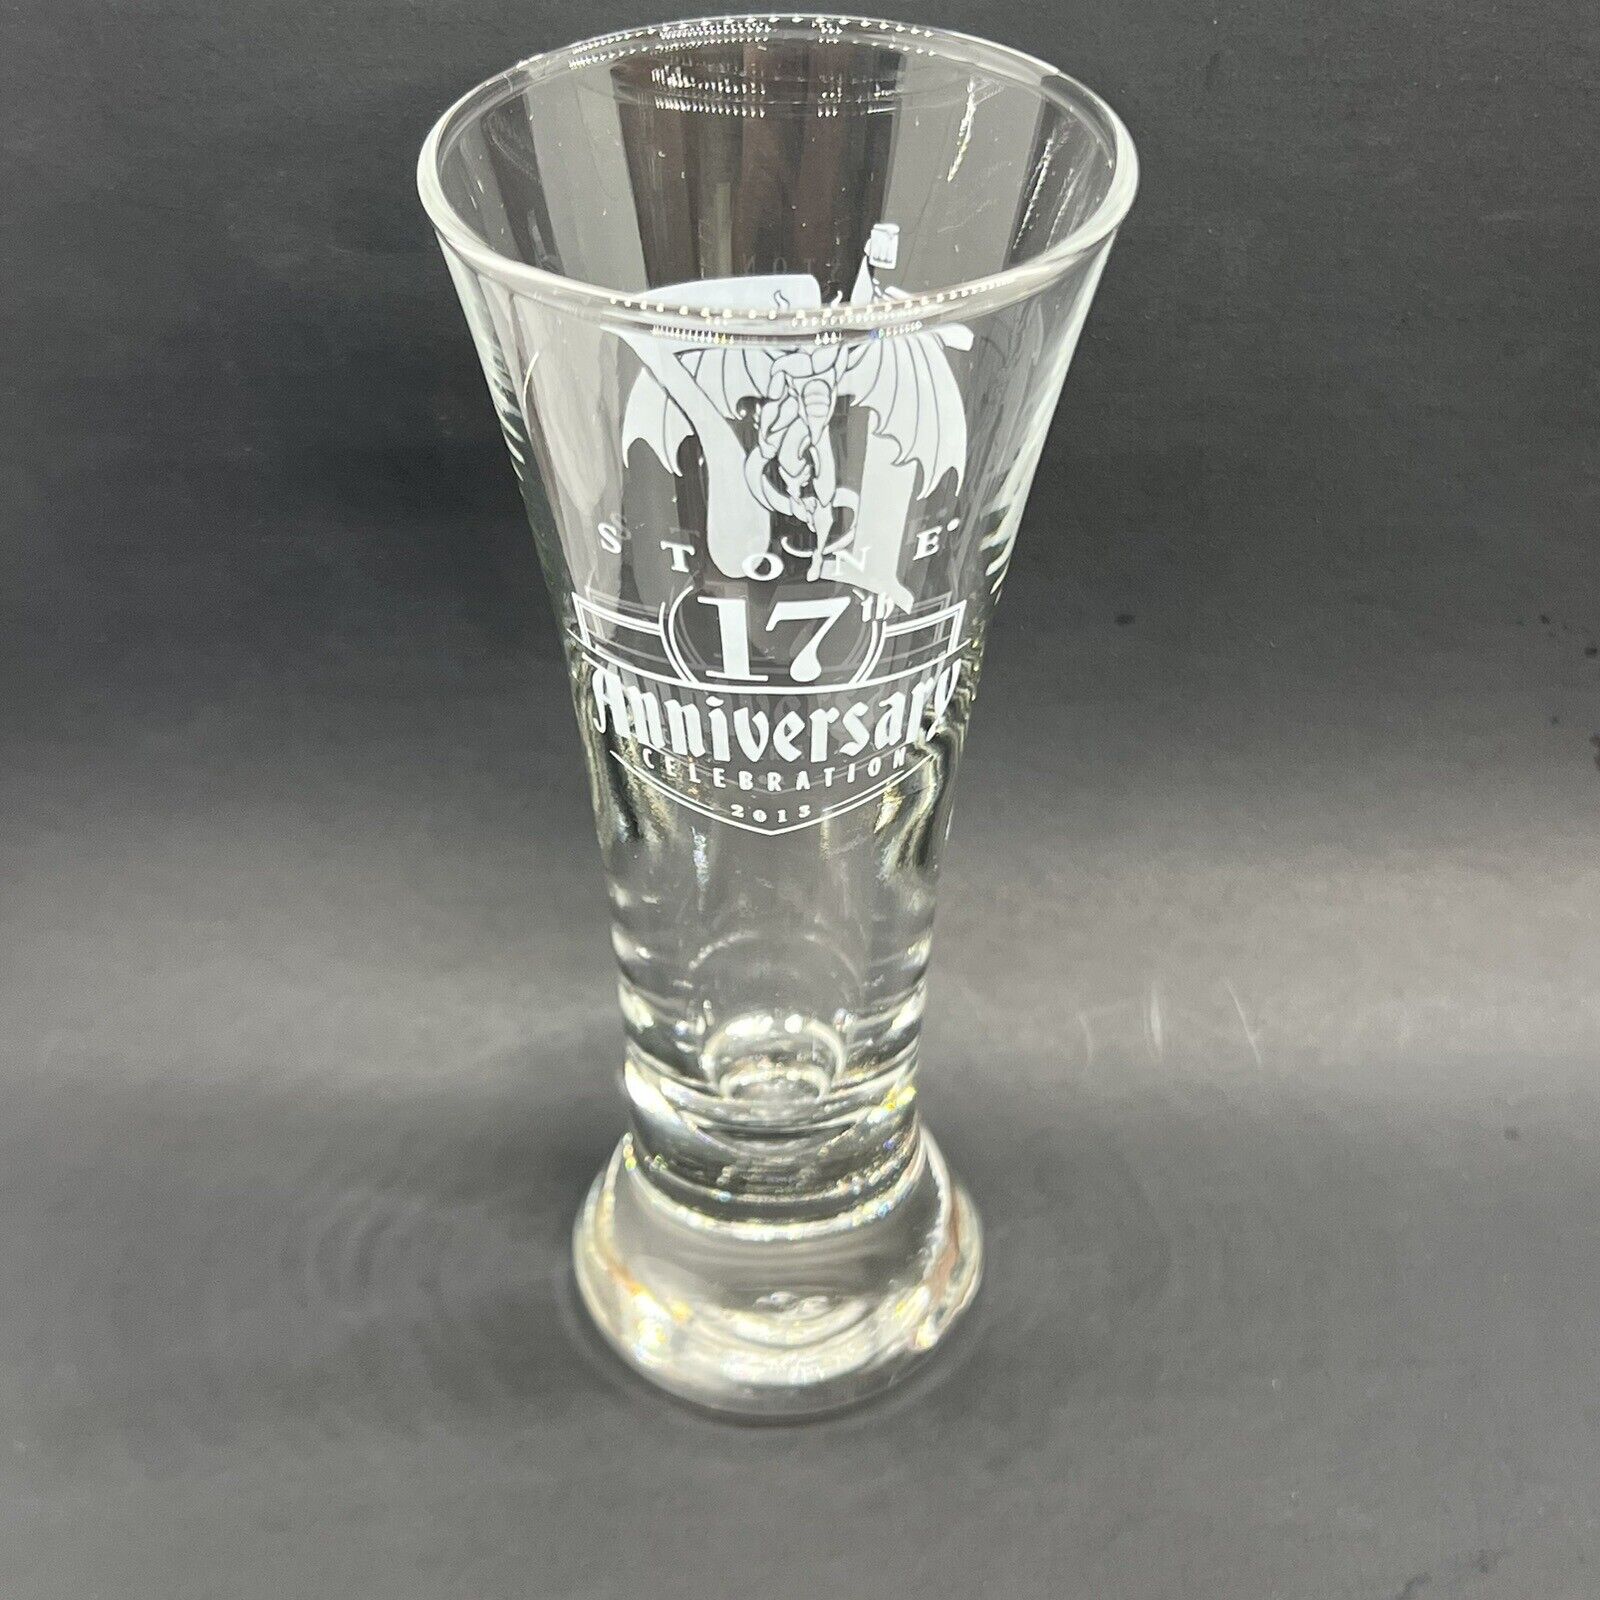 ✅ Stone Brewing 17th Anniversary 2013 Collectors Fluted Beer Tasting Glass